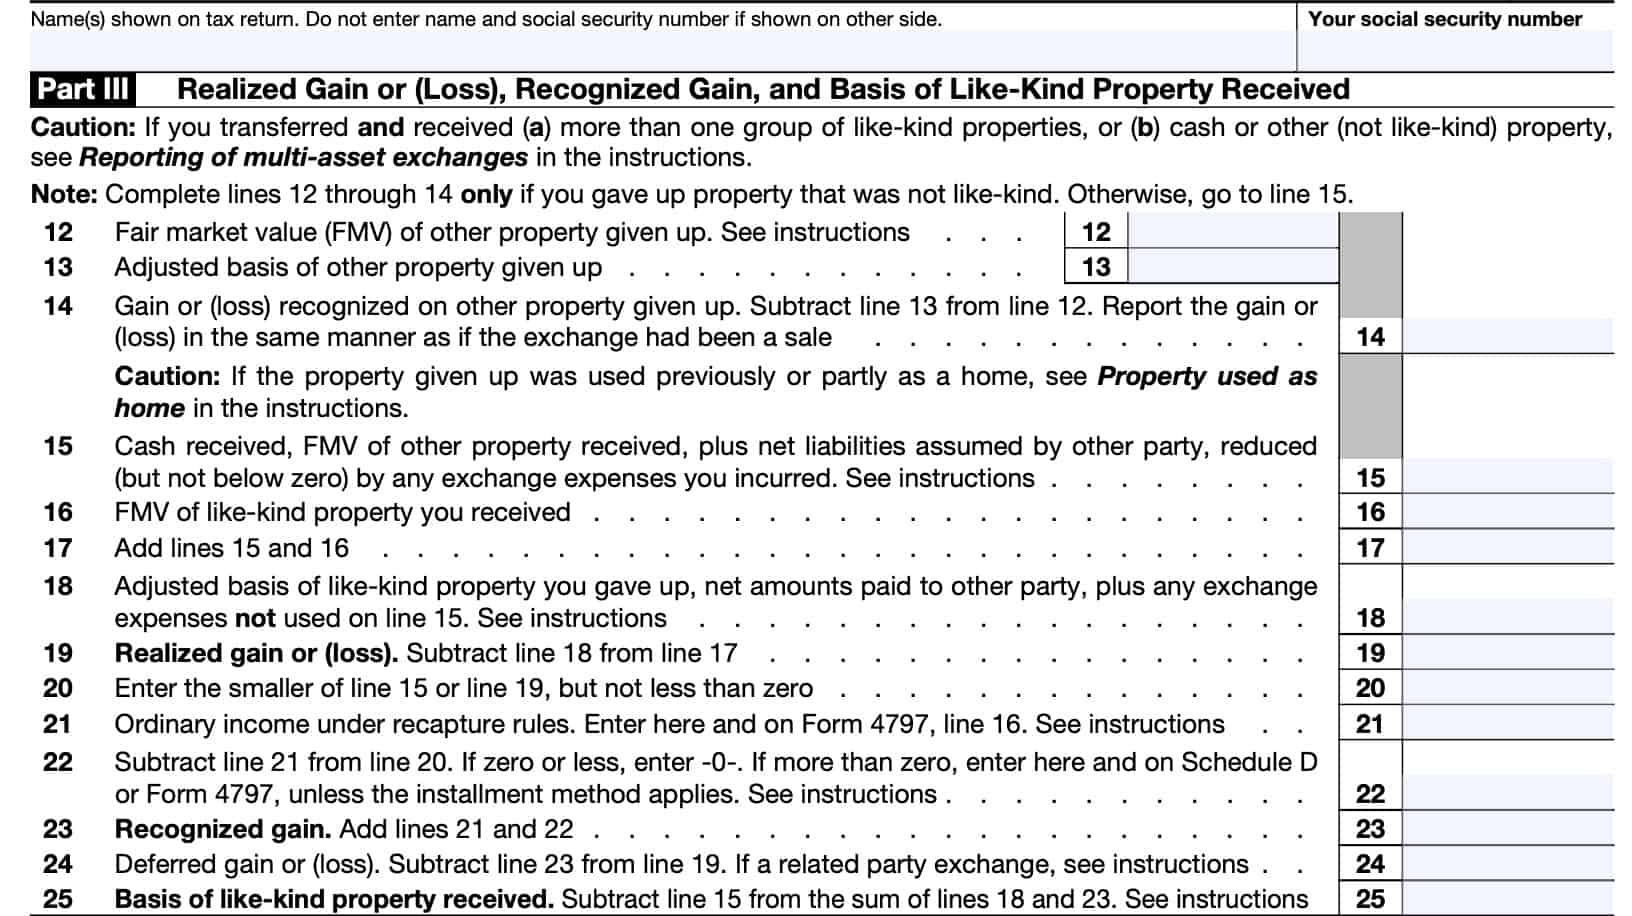 part iii: realized gain or loss, recognized gain, and basis of like-kind property received